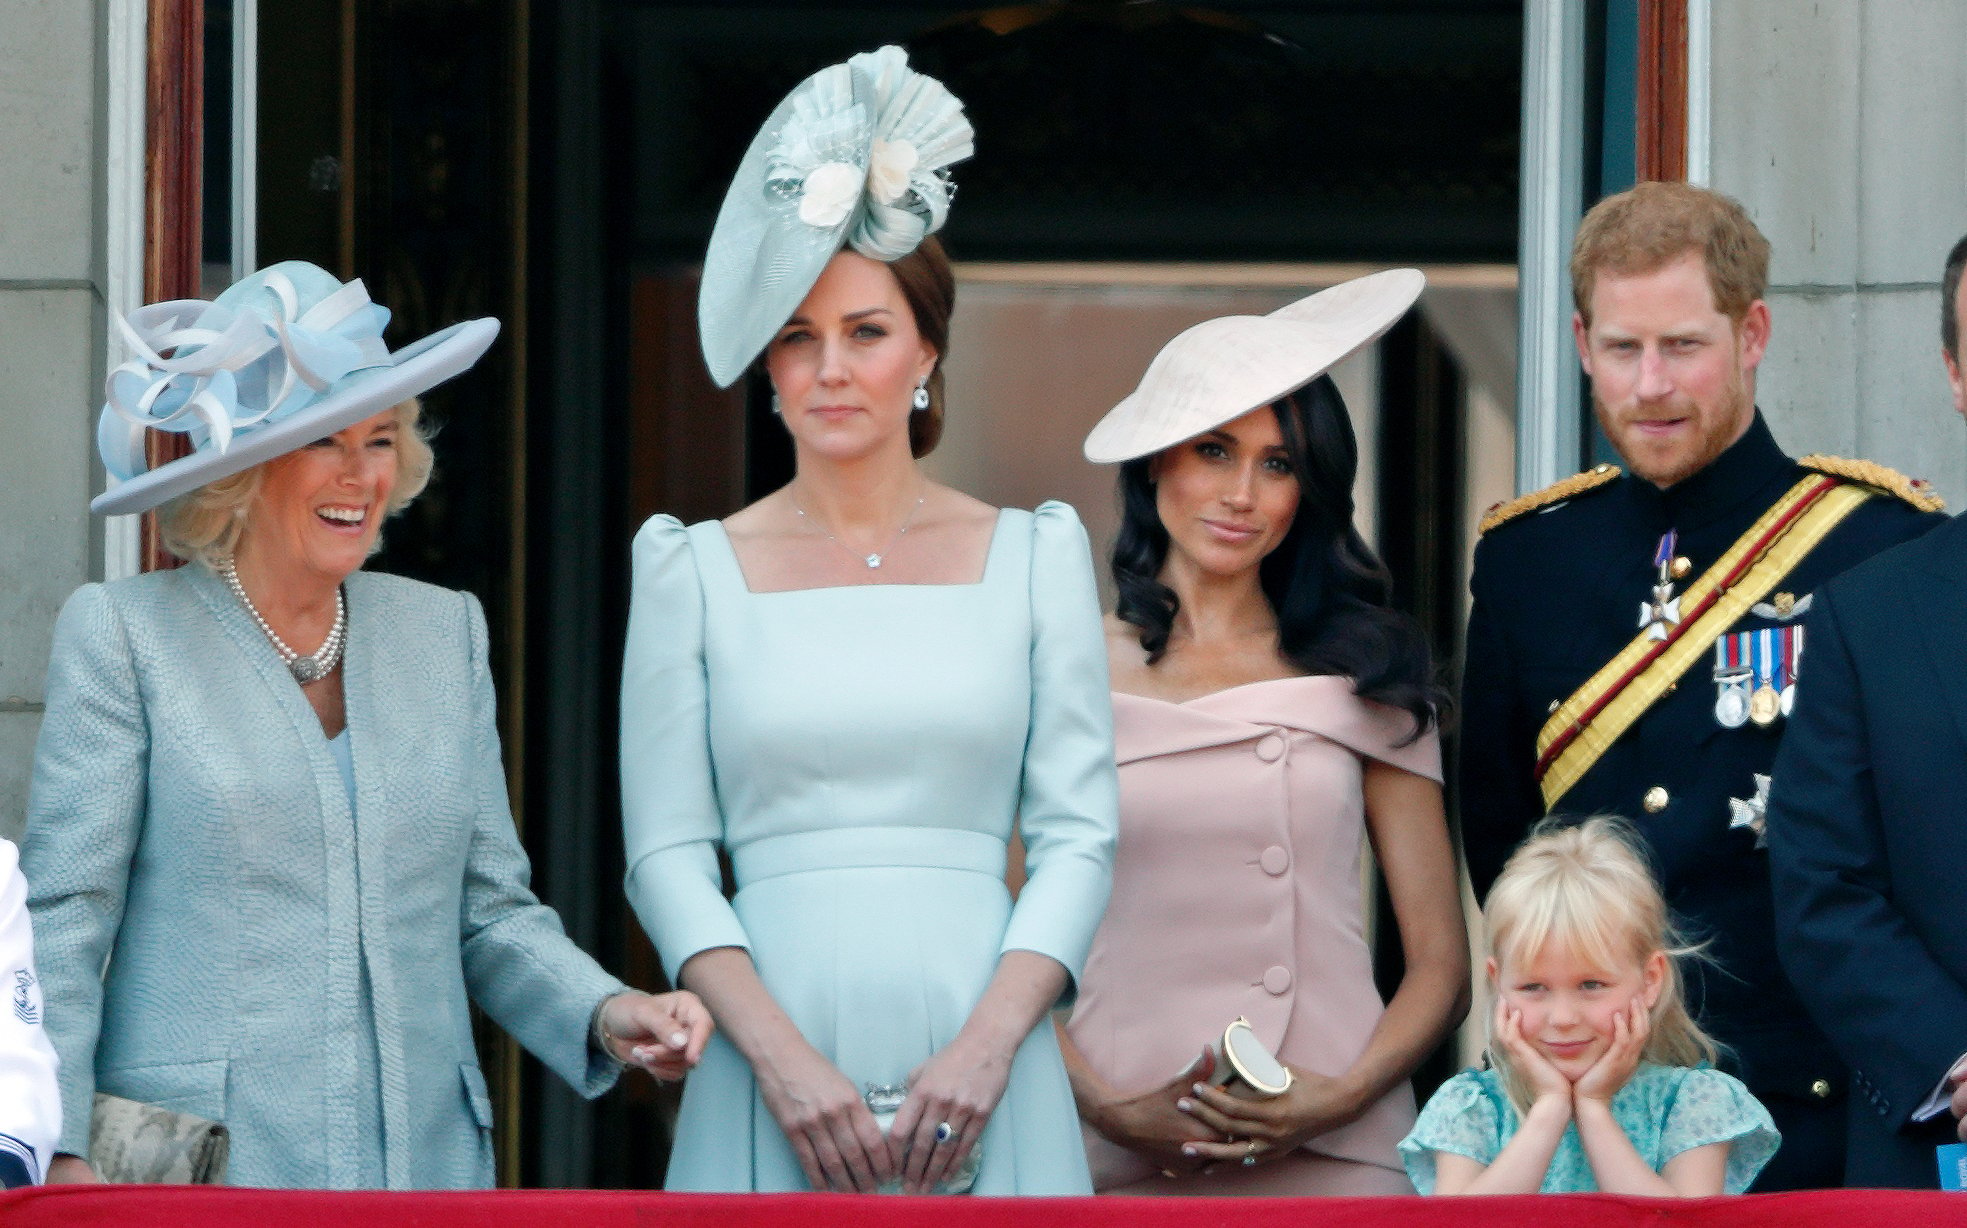 Members of the royal family standing on the Buckingham Palace balcony